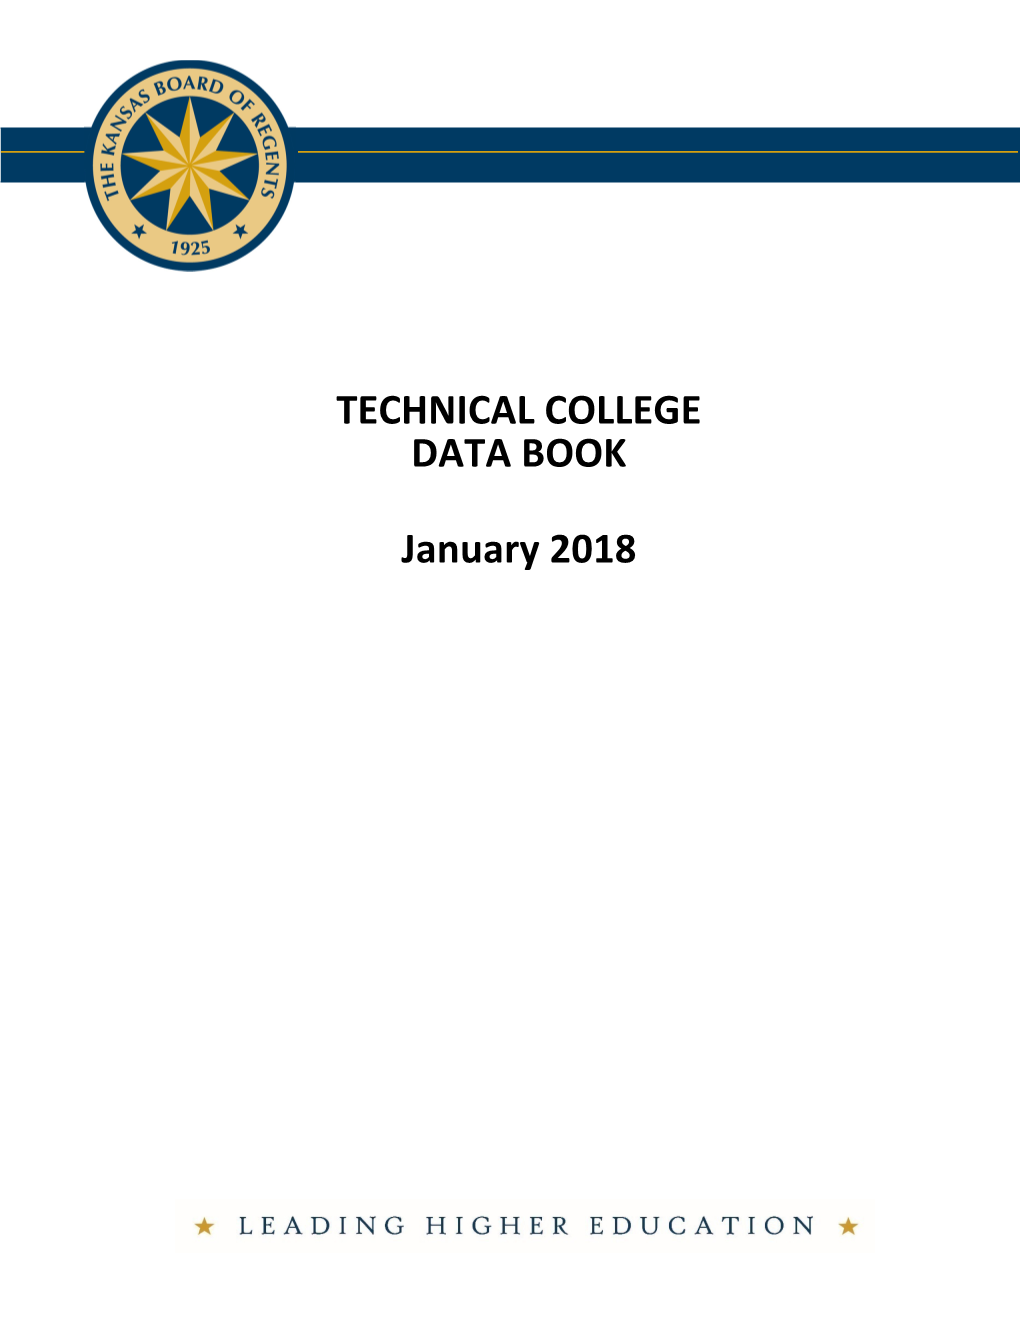 TECHNICAL COLLEGE DATA BOOK January 2018